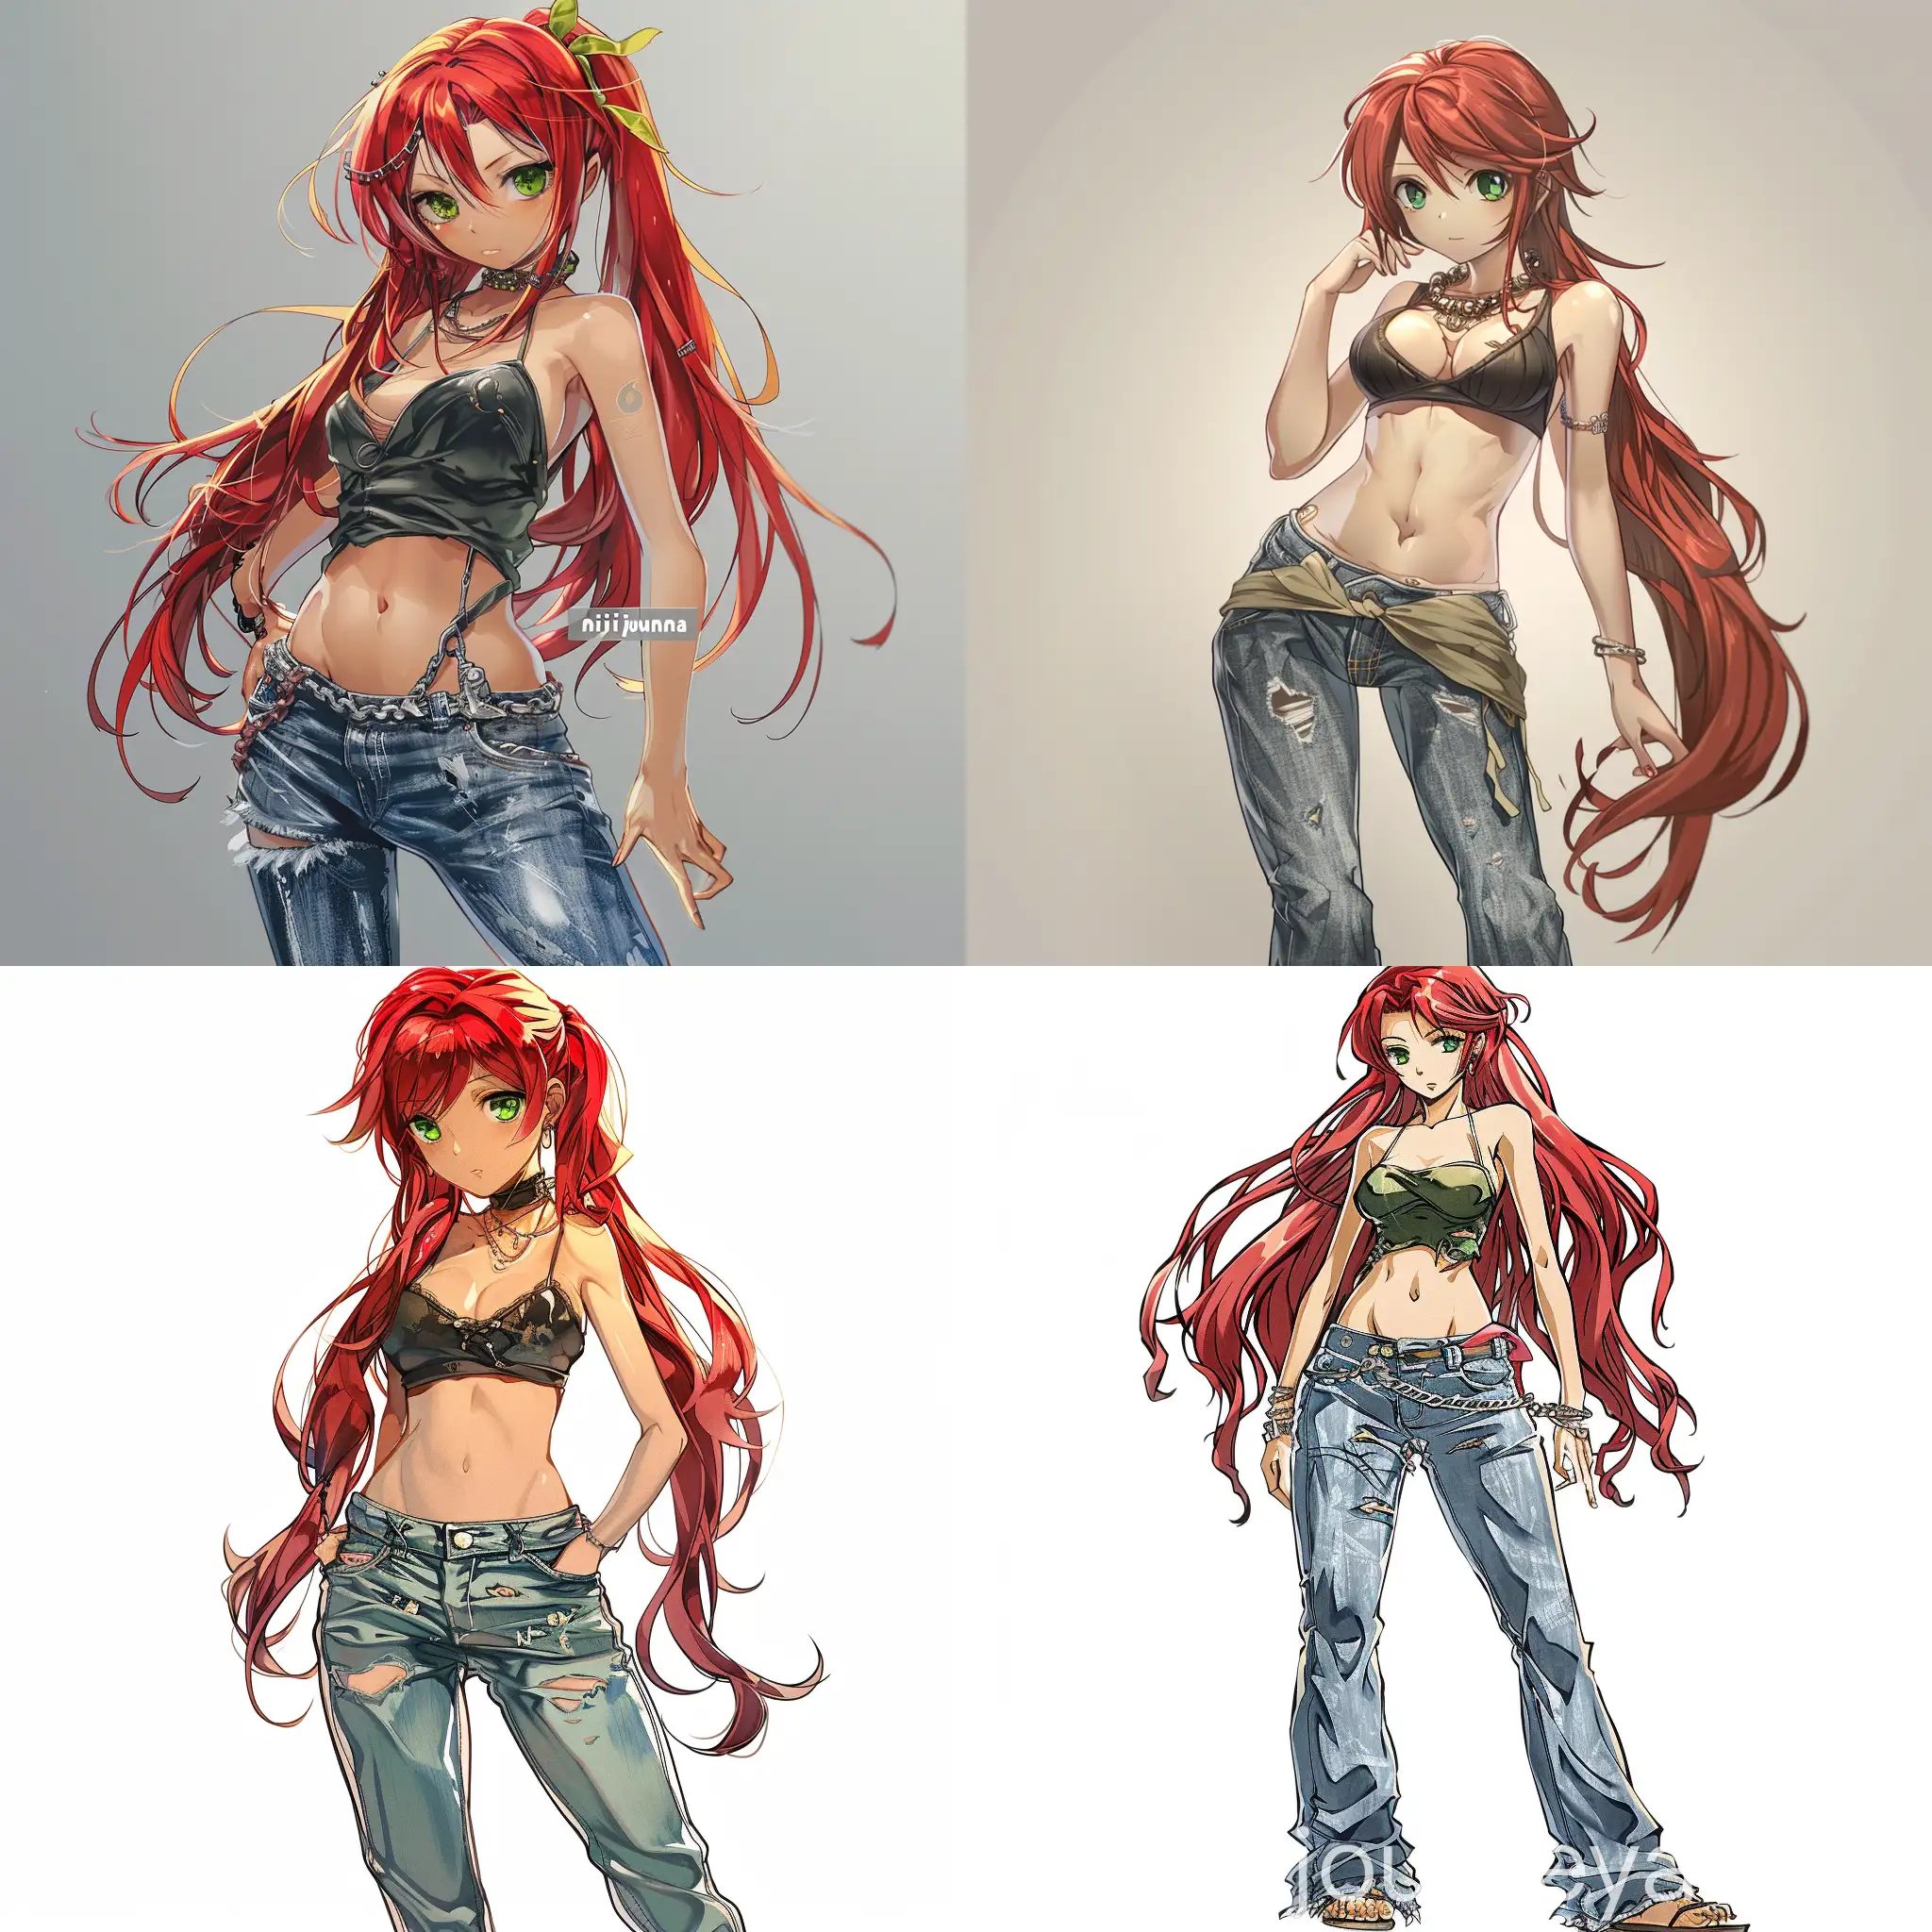 RedHaired-Anime-Girl-in-Stylish-Top-and-Jeans